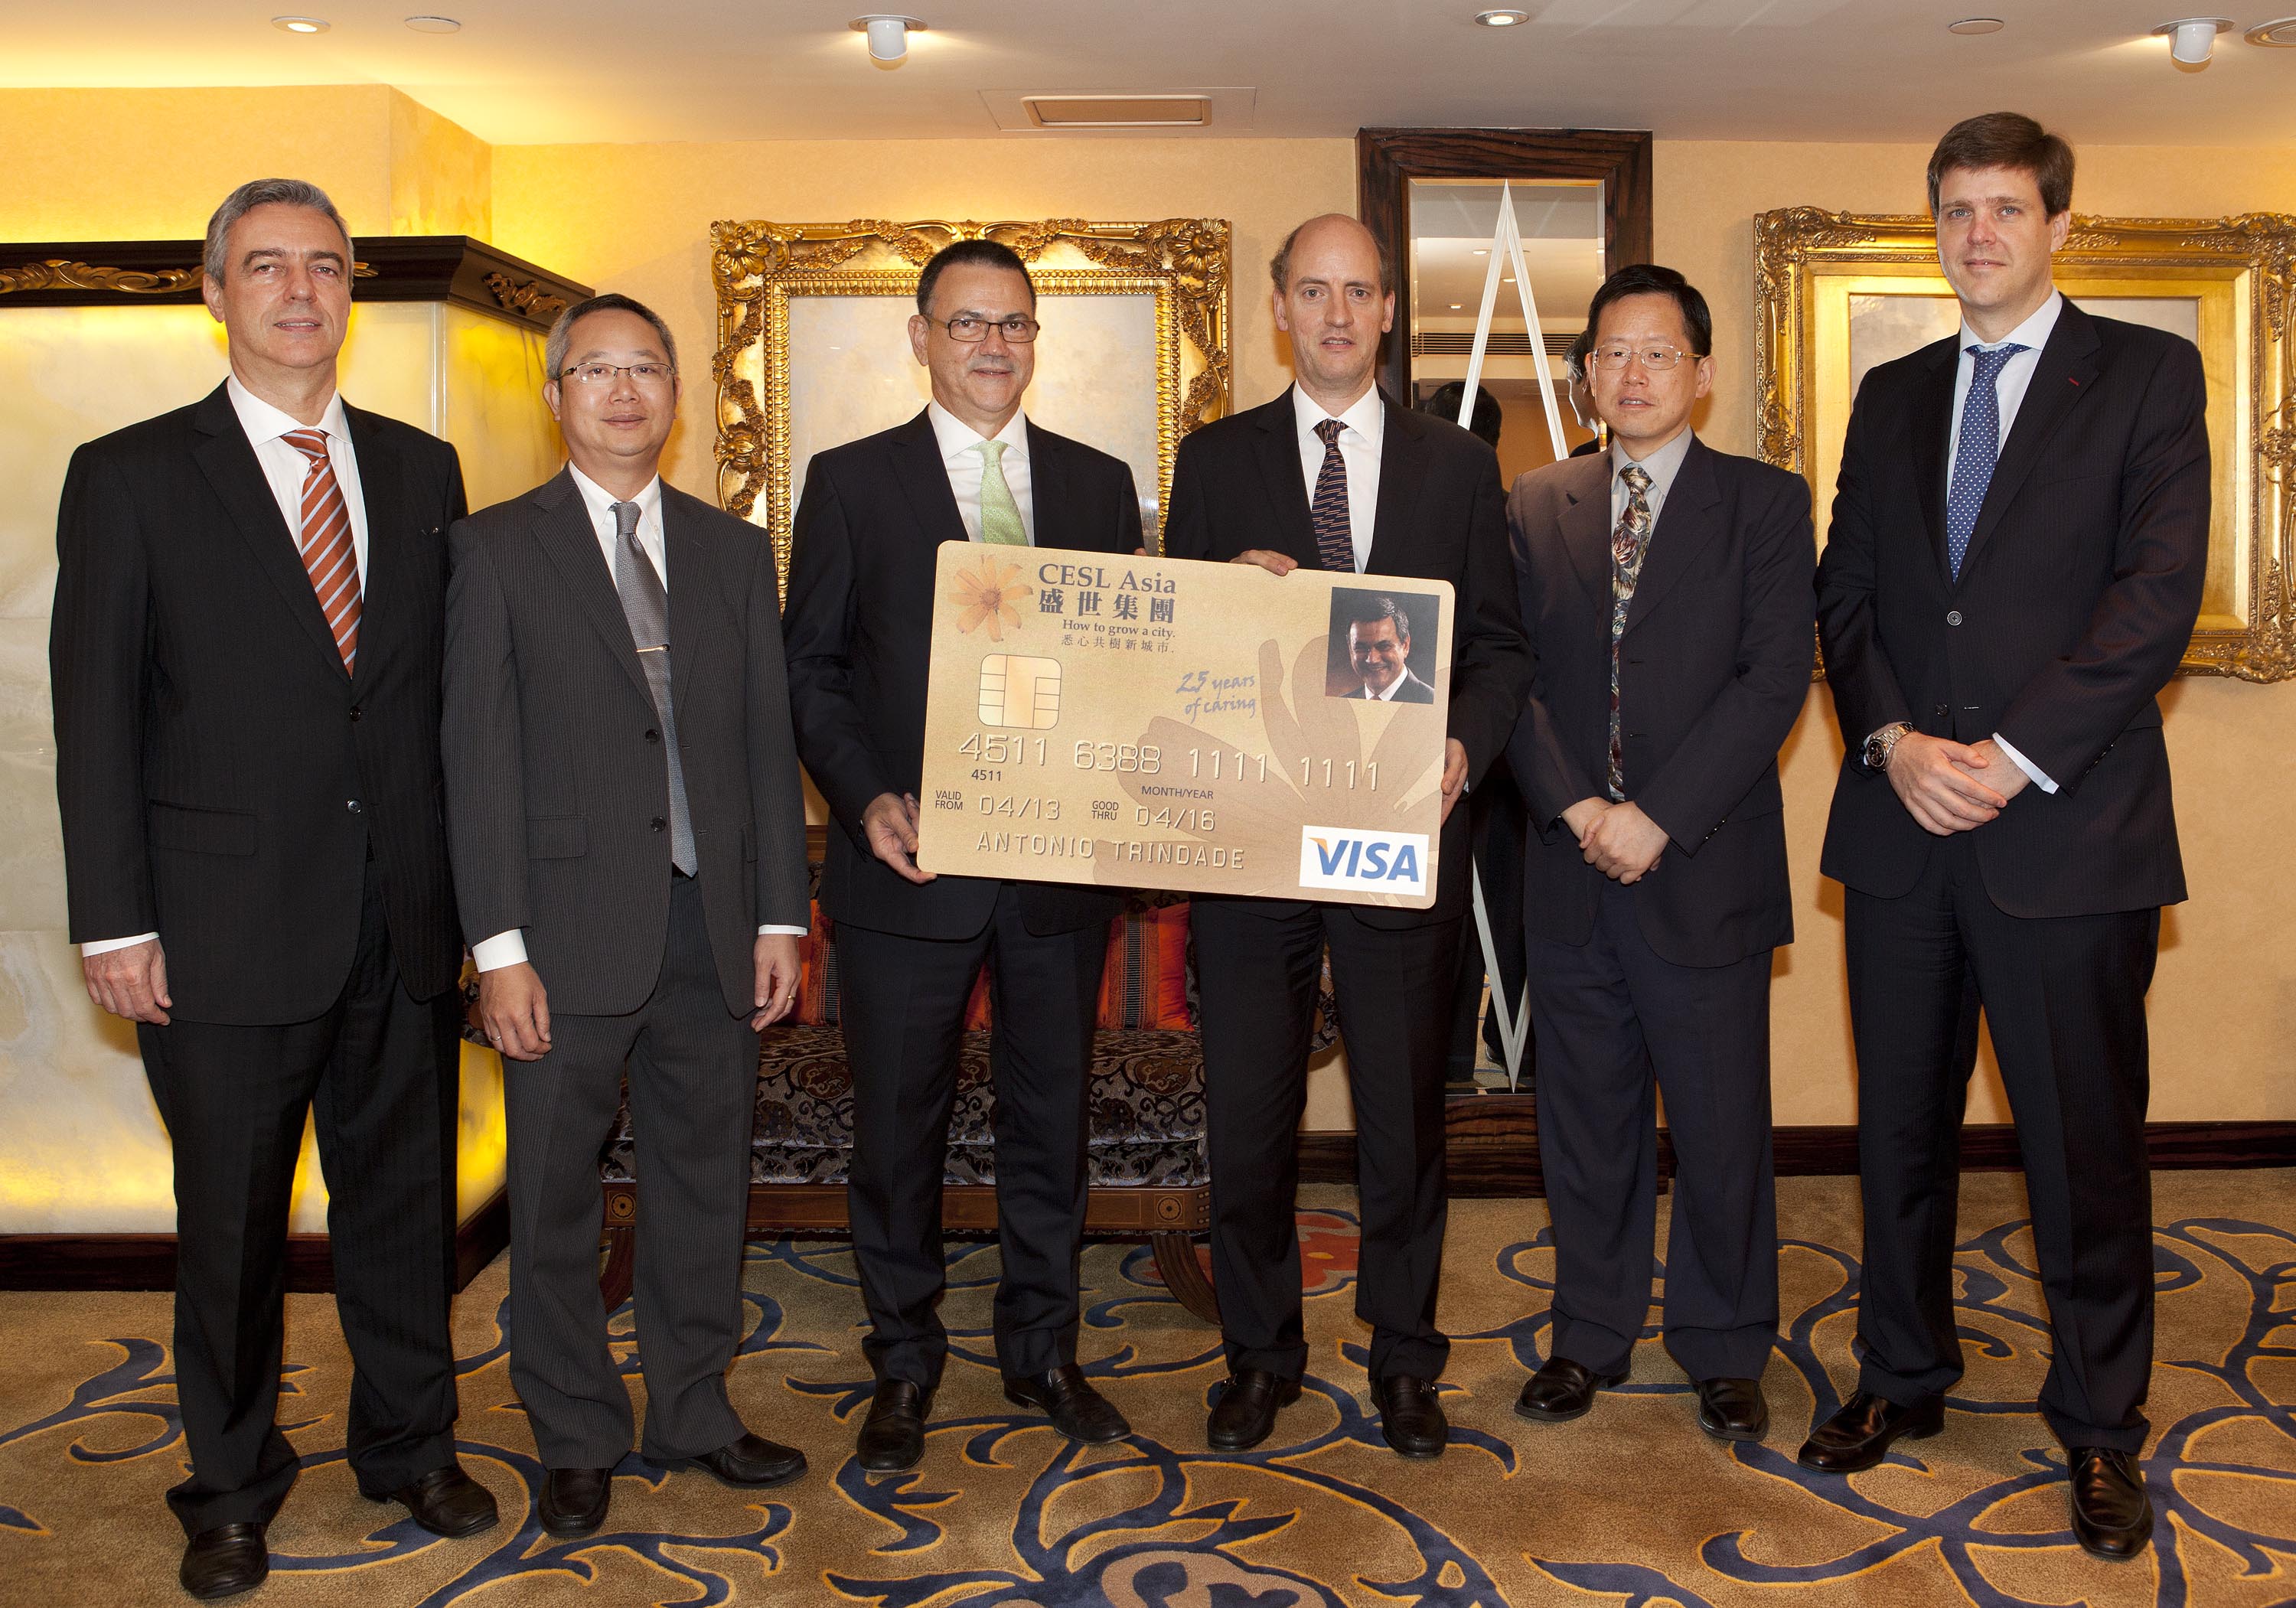 CESL Asia Together with BNU Launch the CESL Asia Credit Card
                          